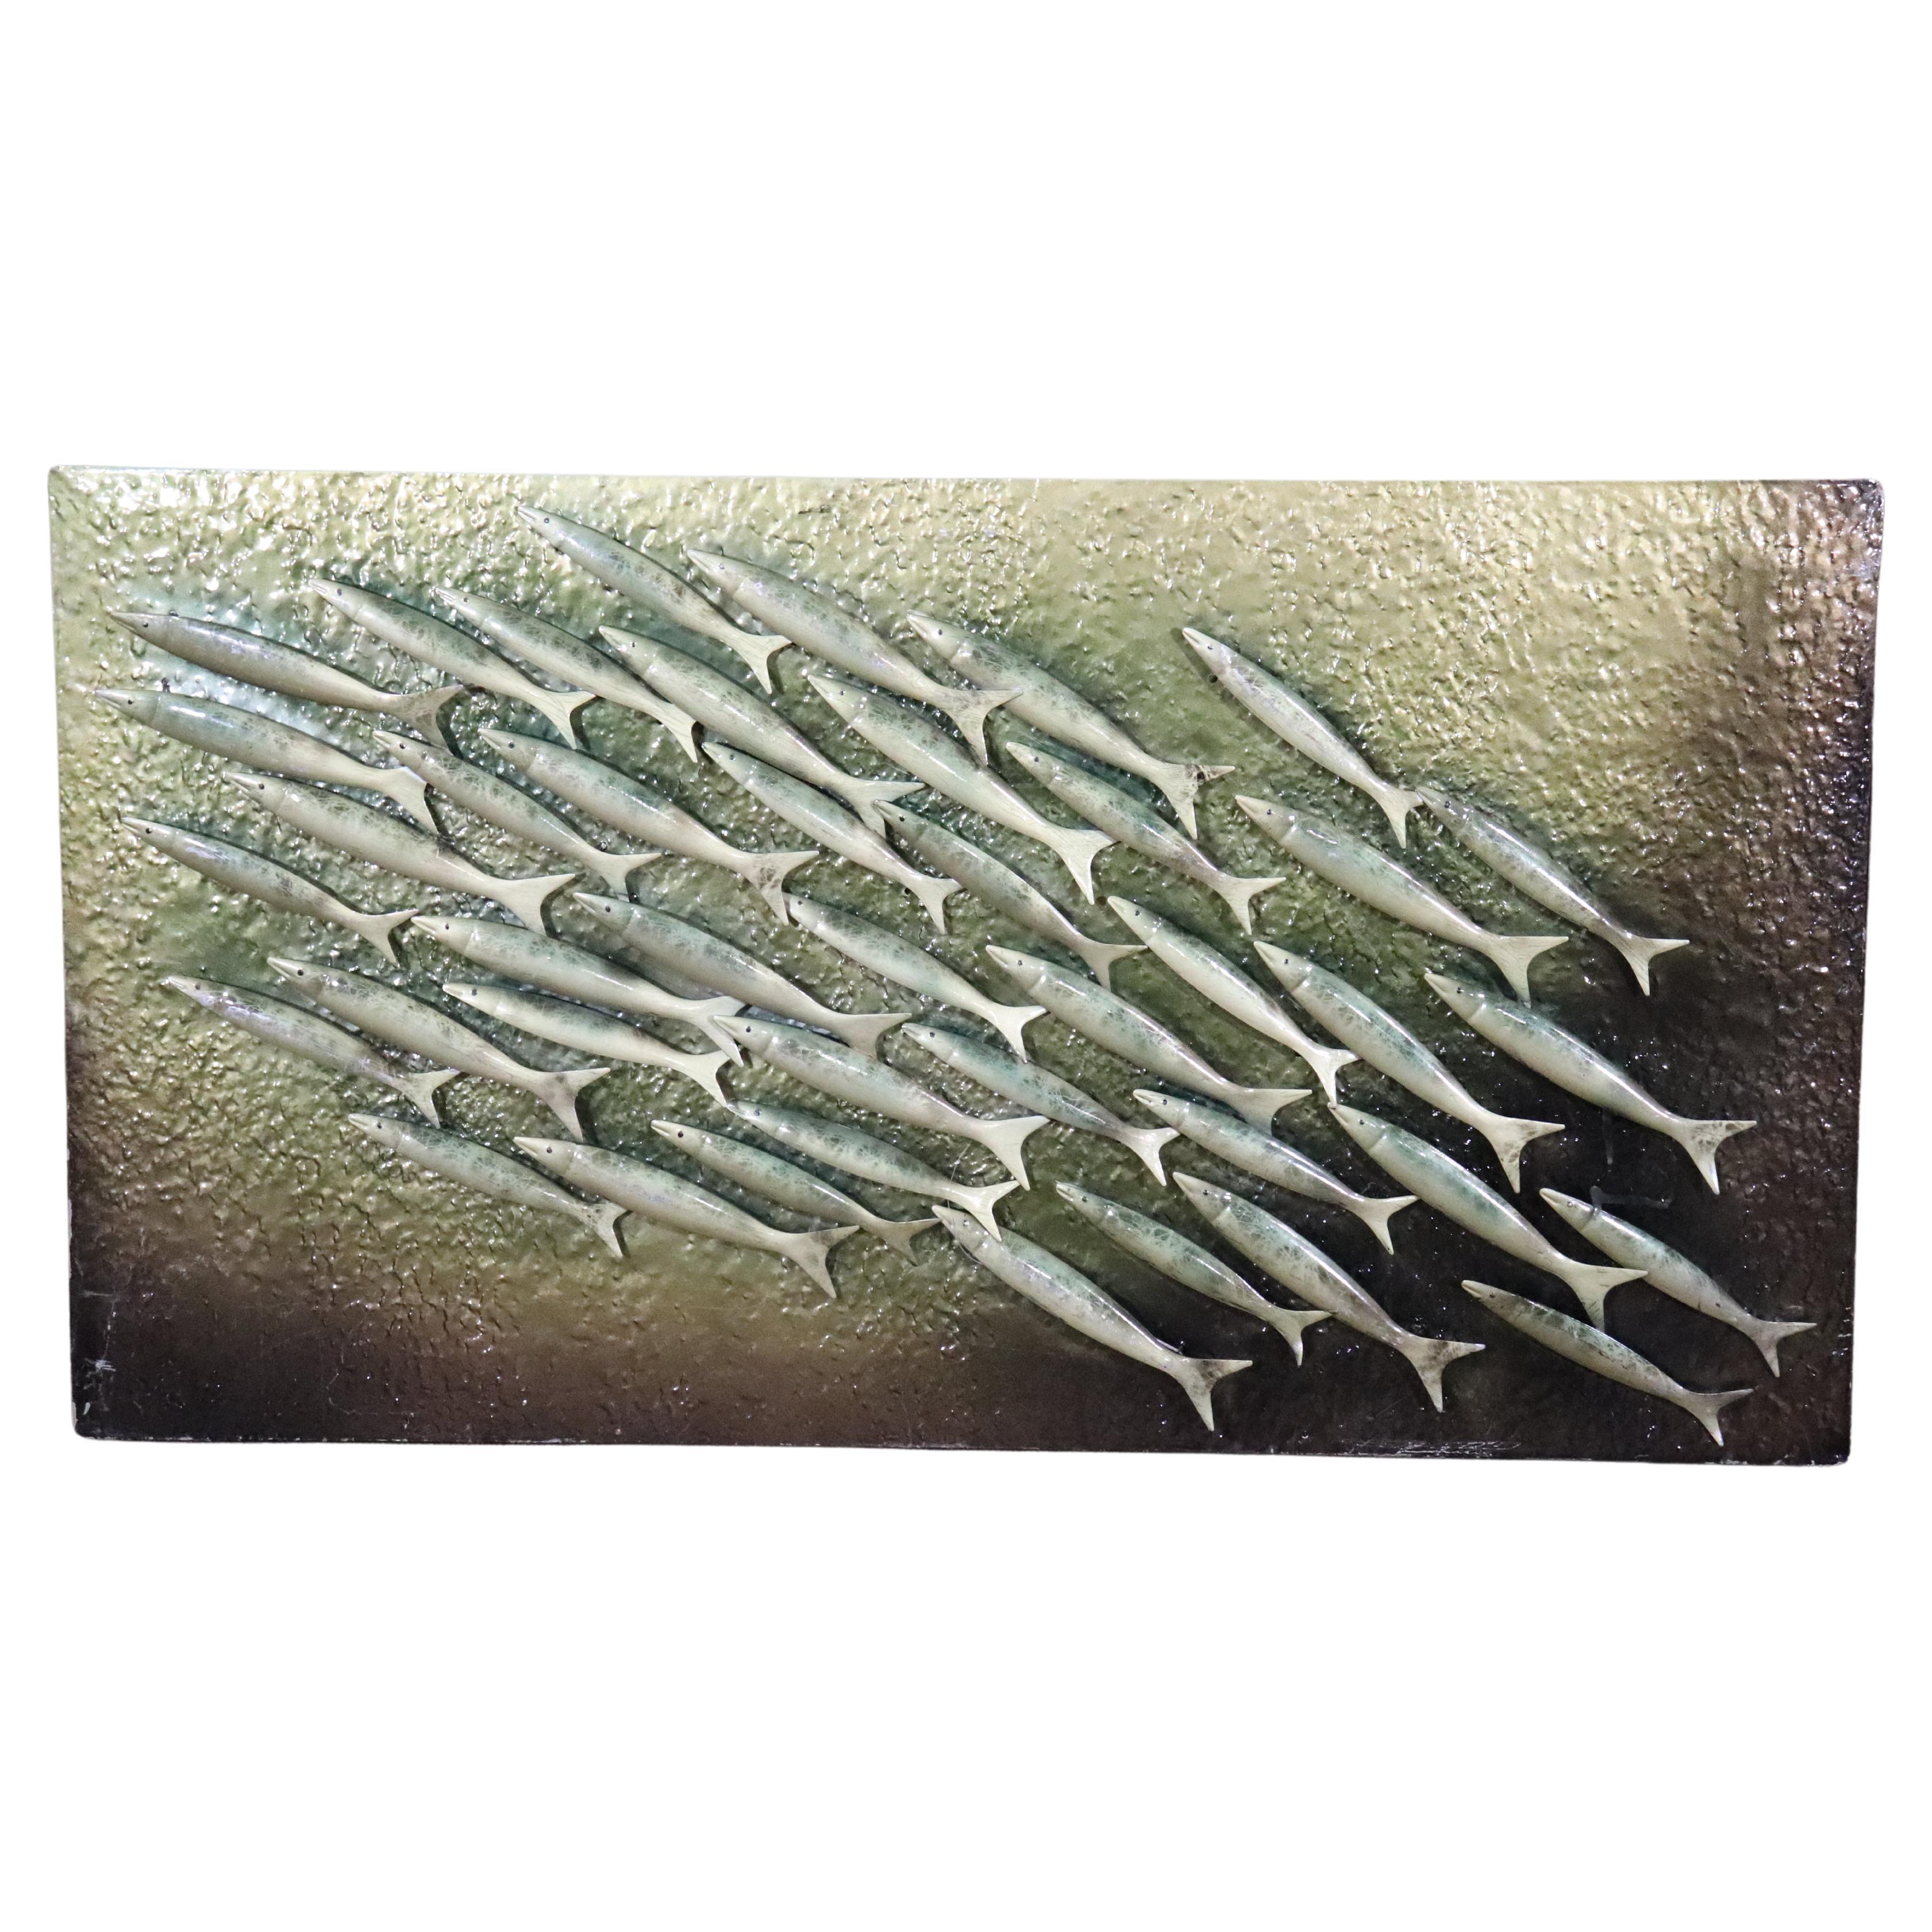 Metal Wall Art of Fish For Sale